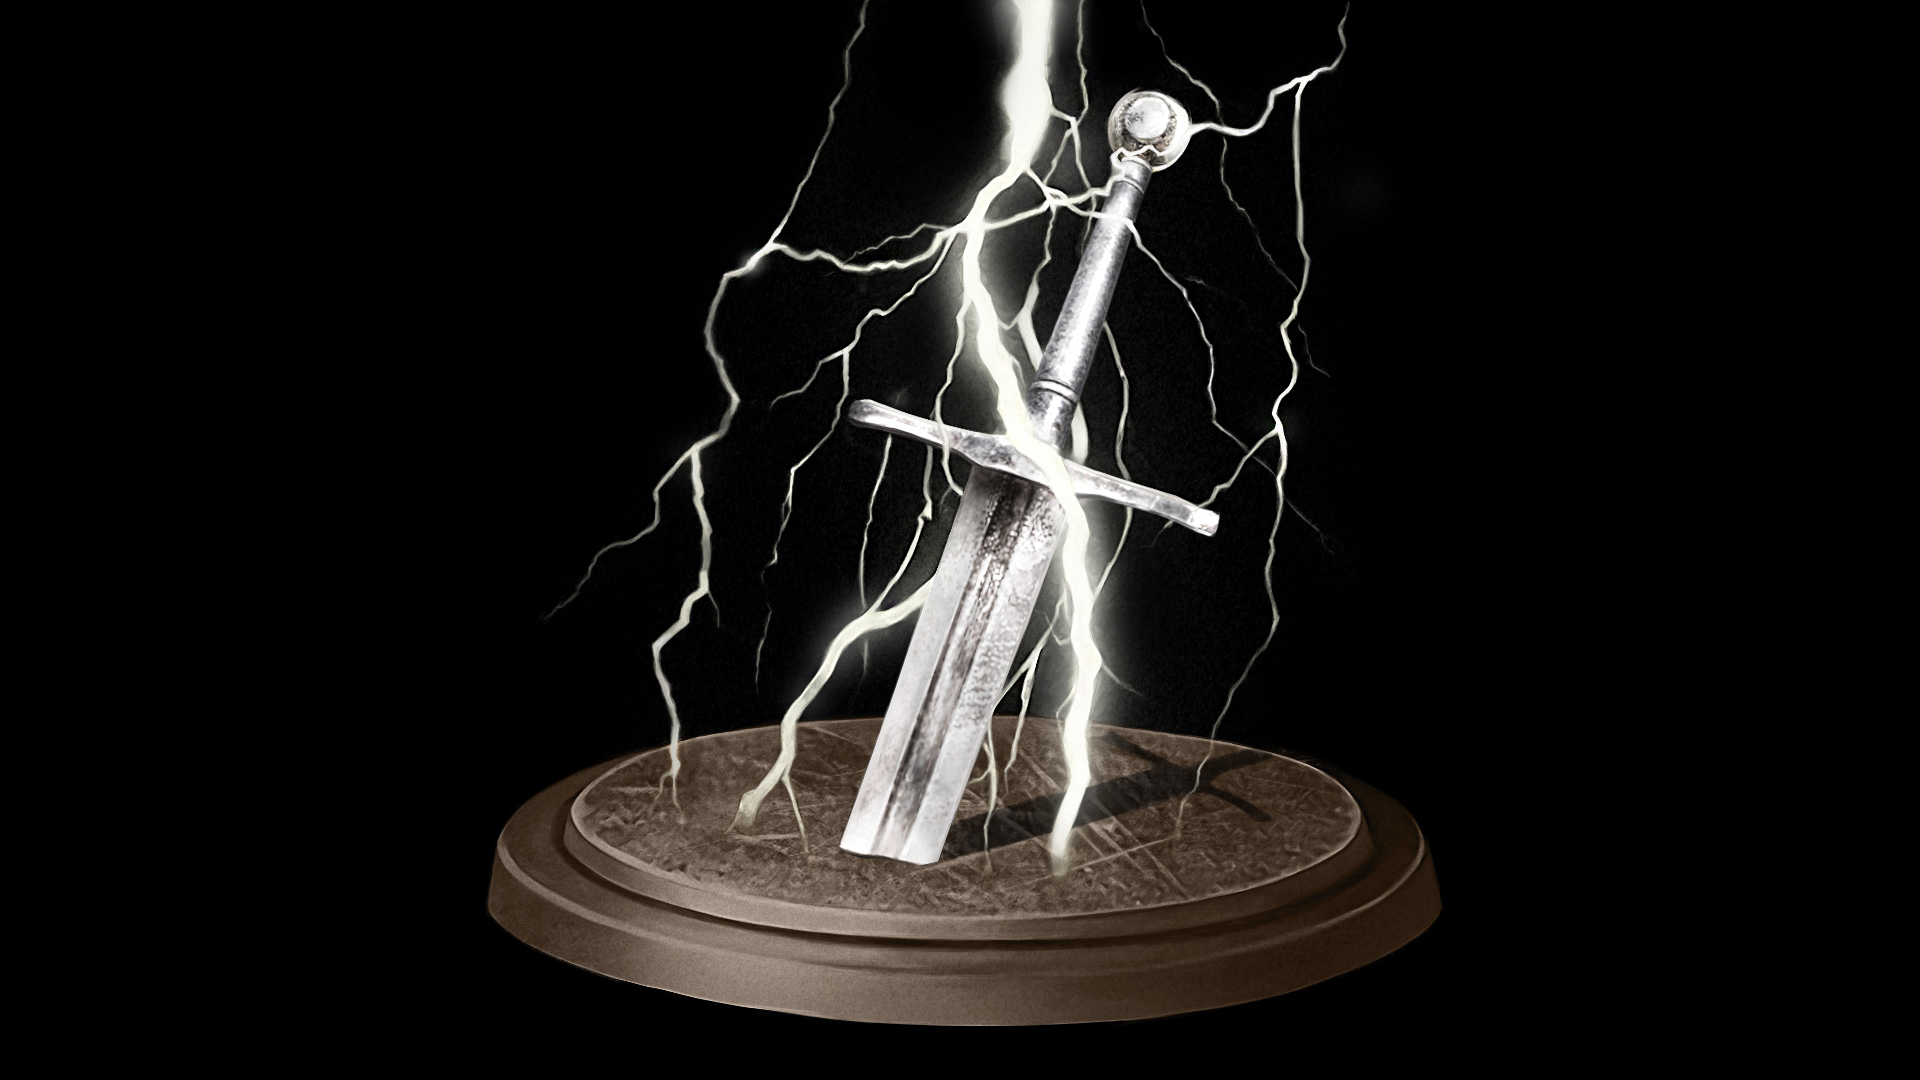 Icon for Lightning Weapon